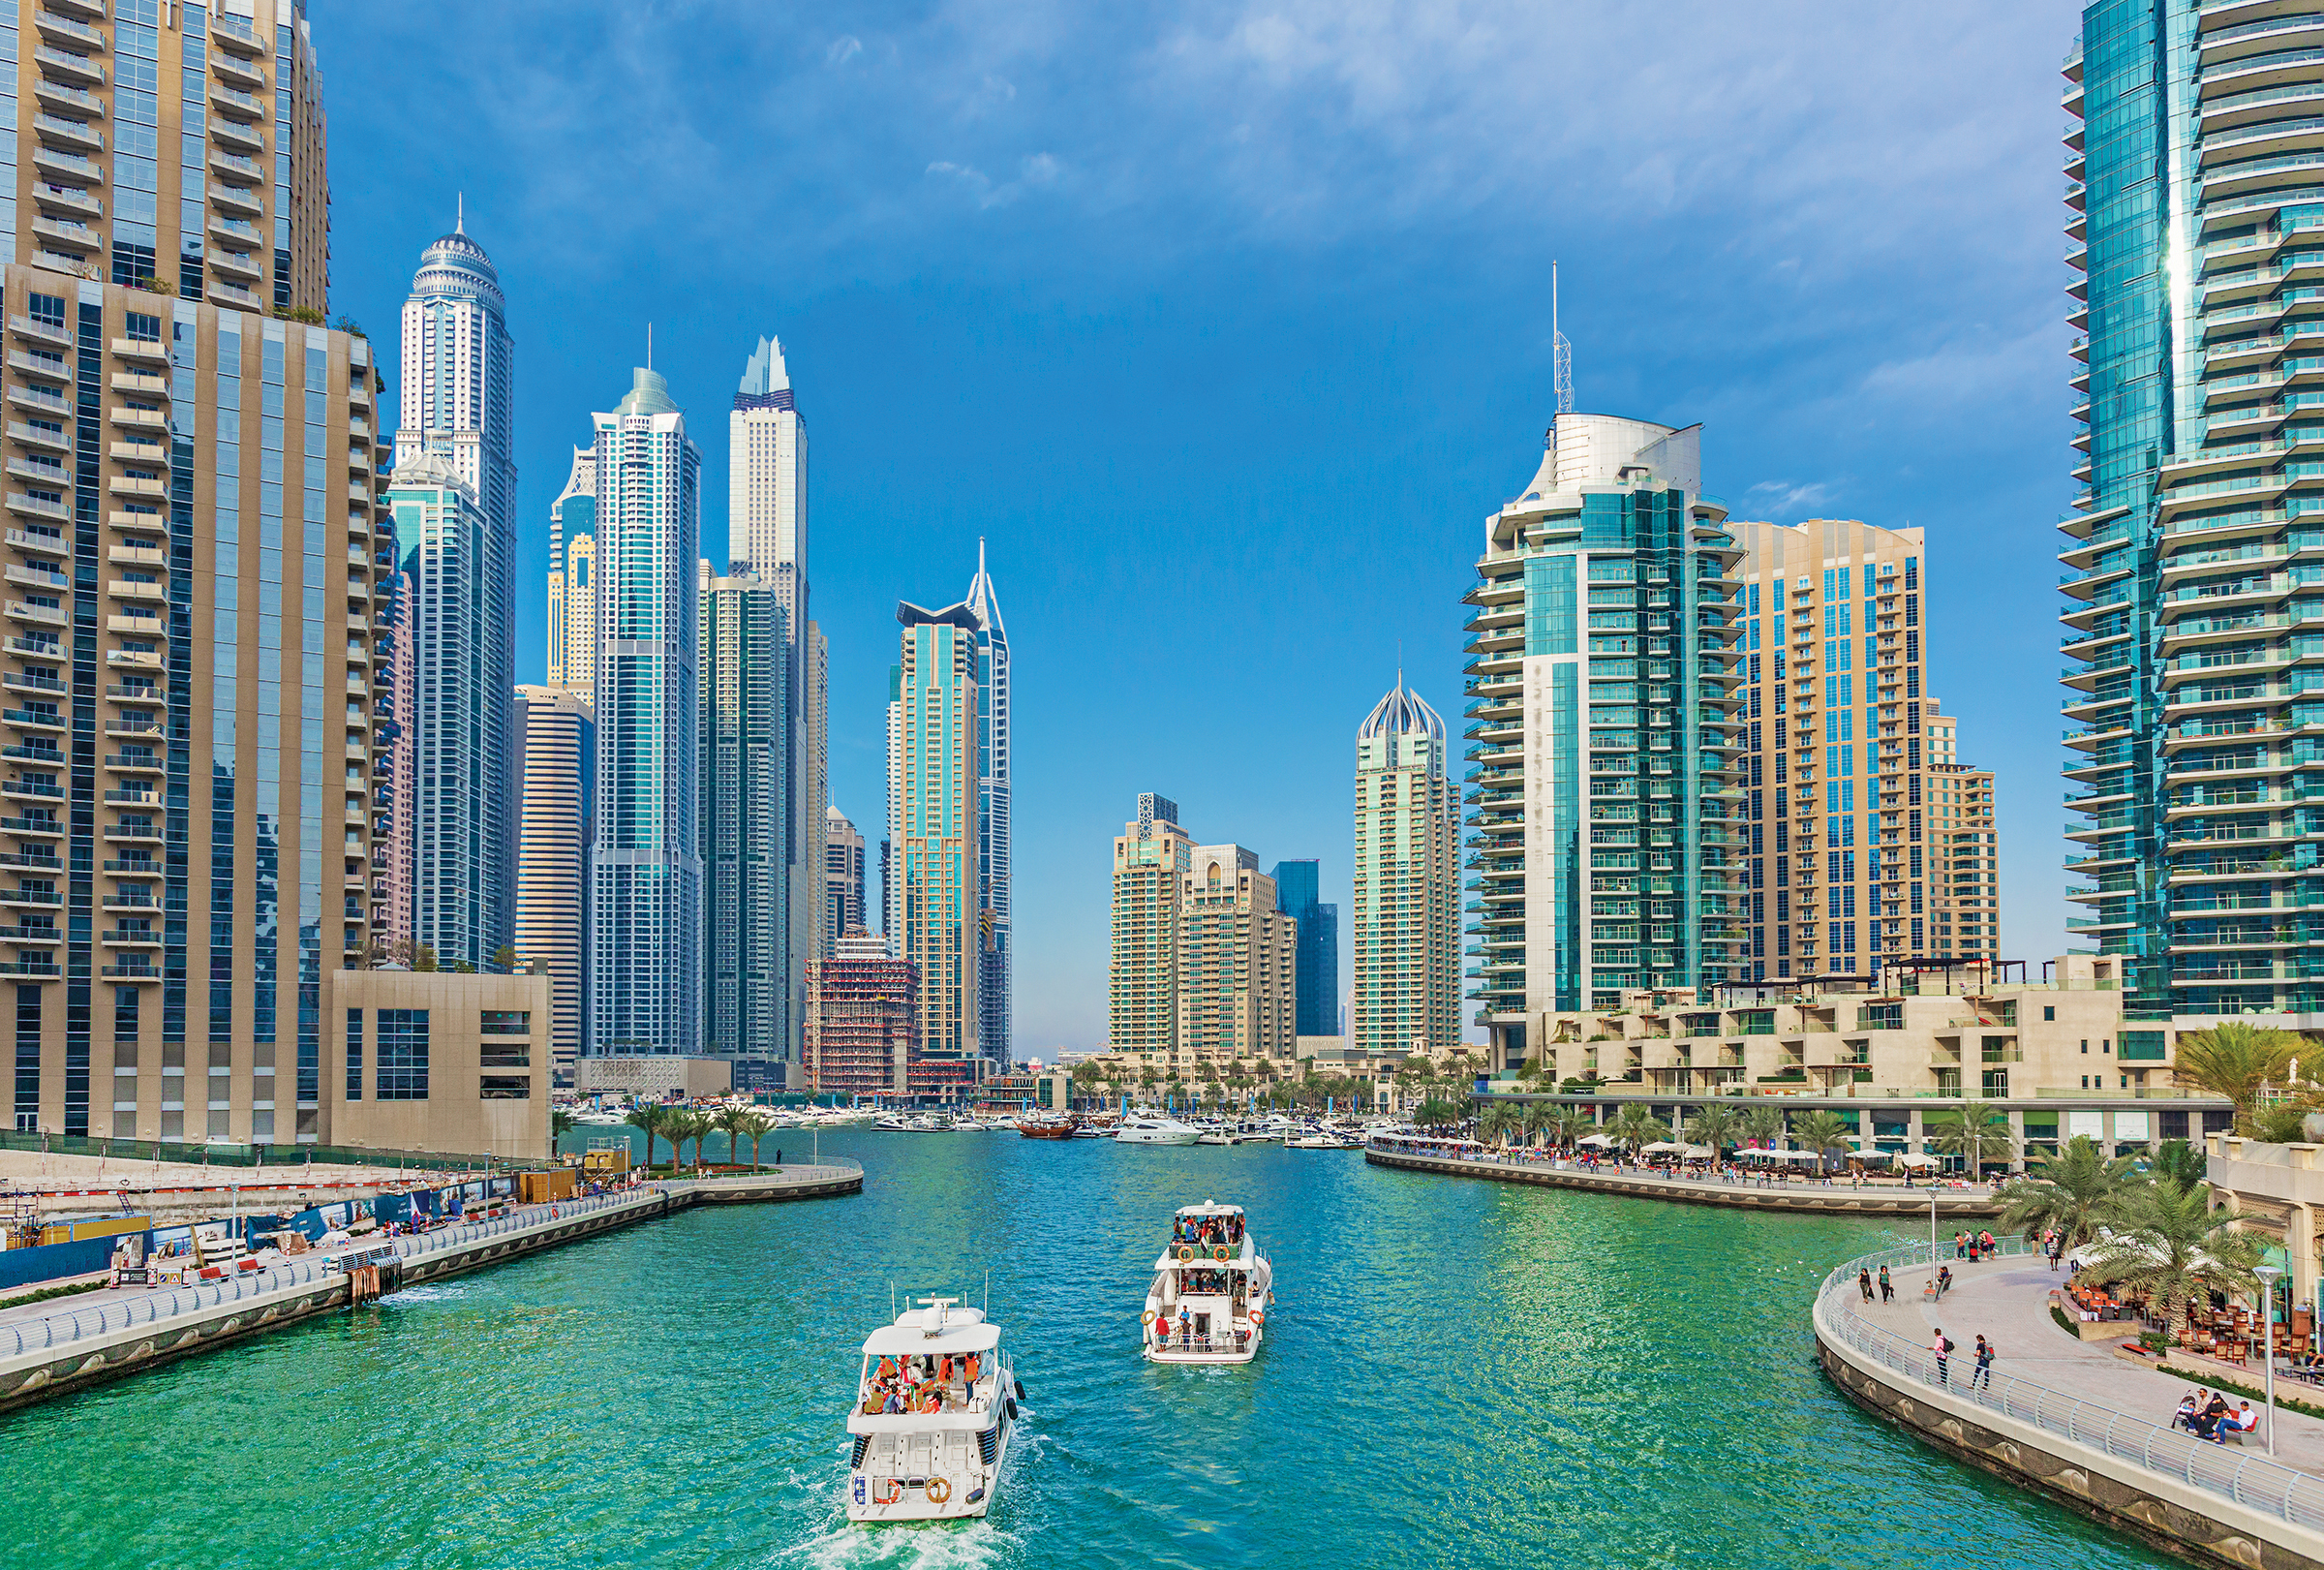 Dubia marina, featuring two boats floating down the canal with large buildings on either side and in front of them. 